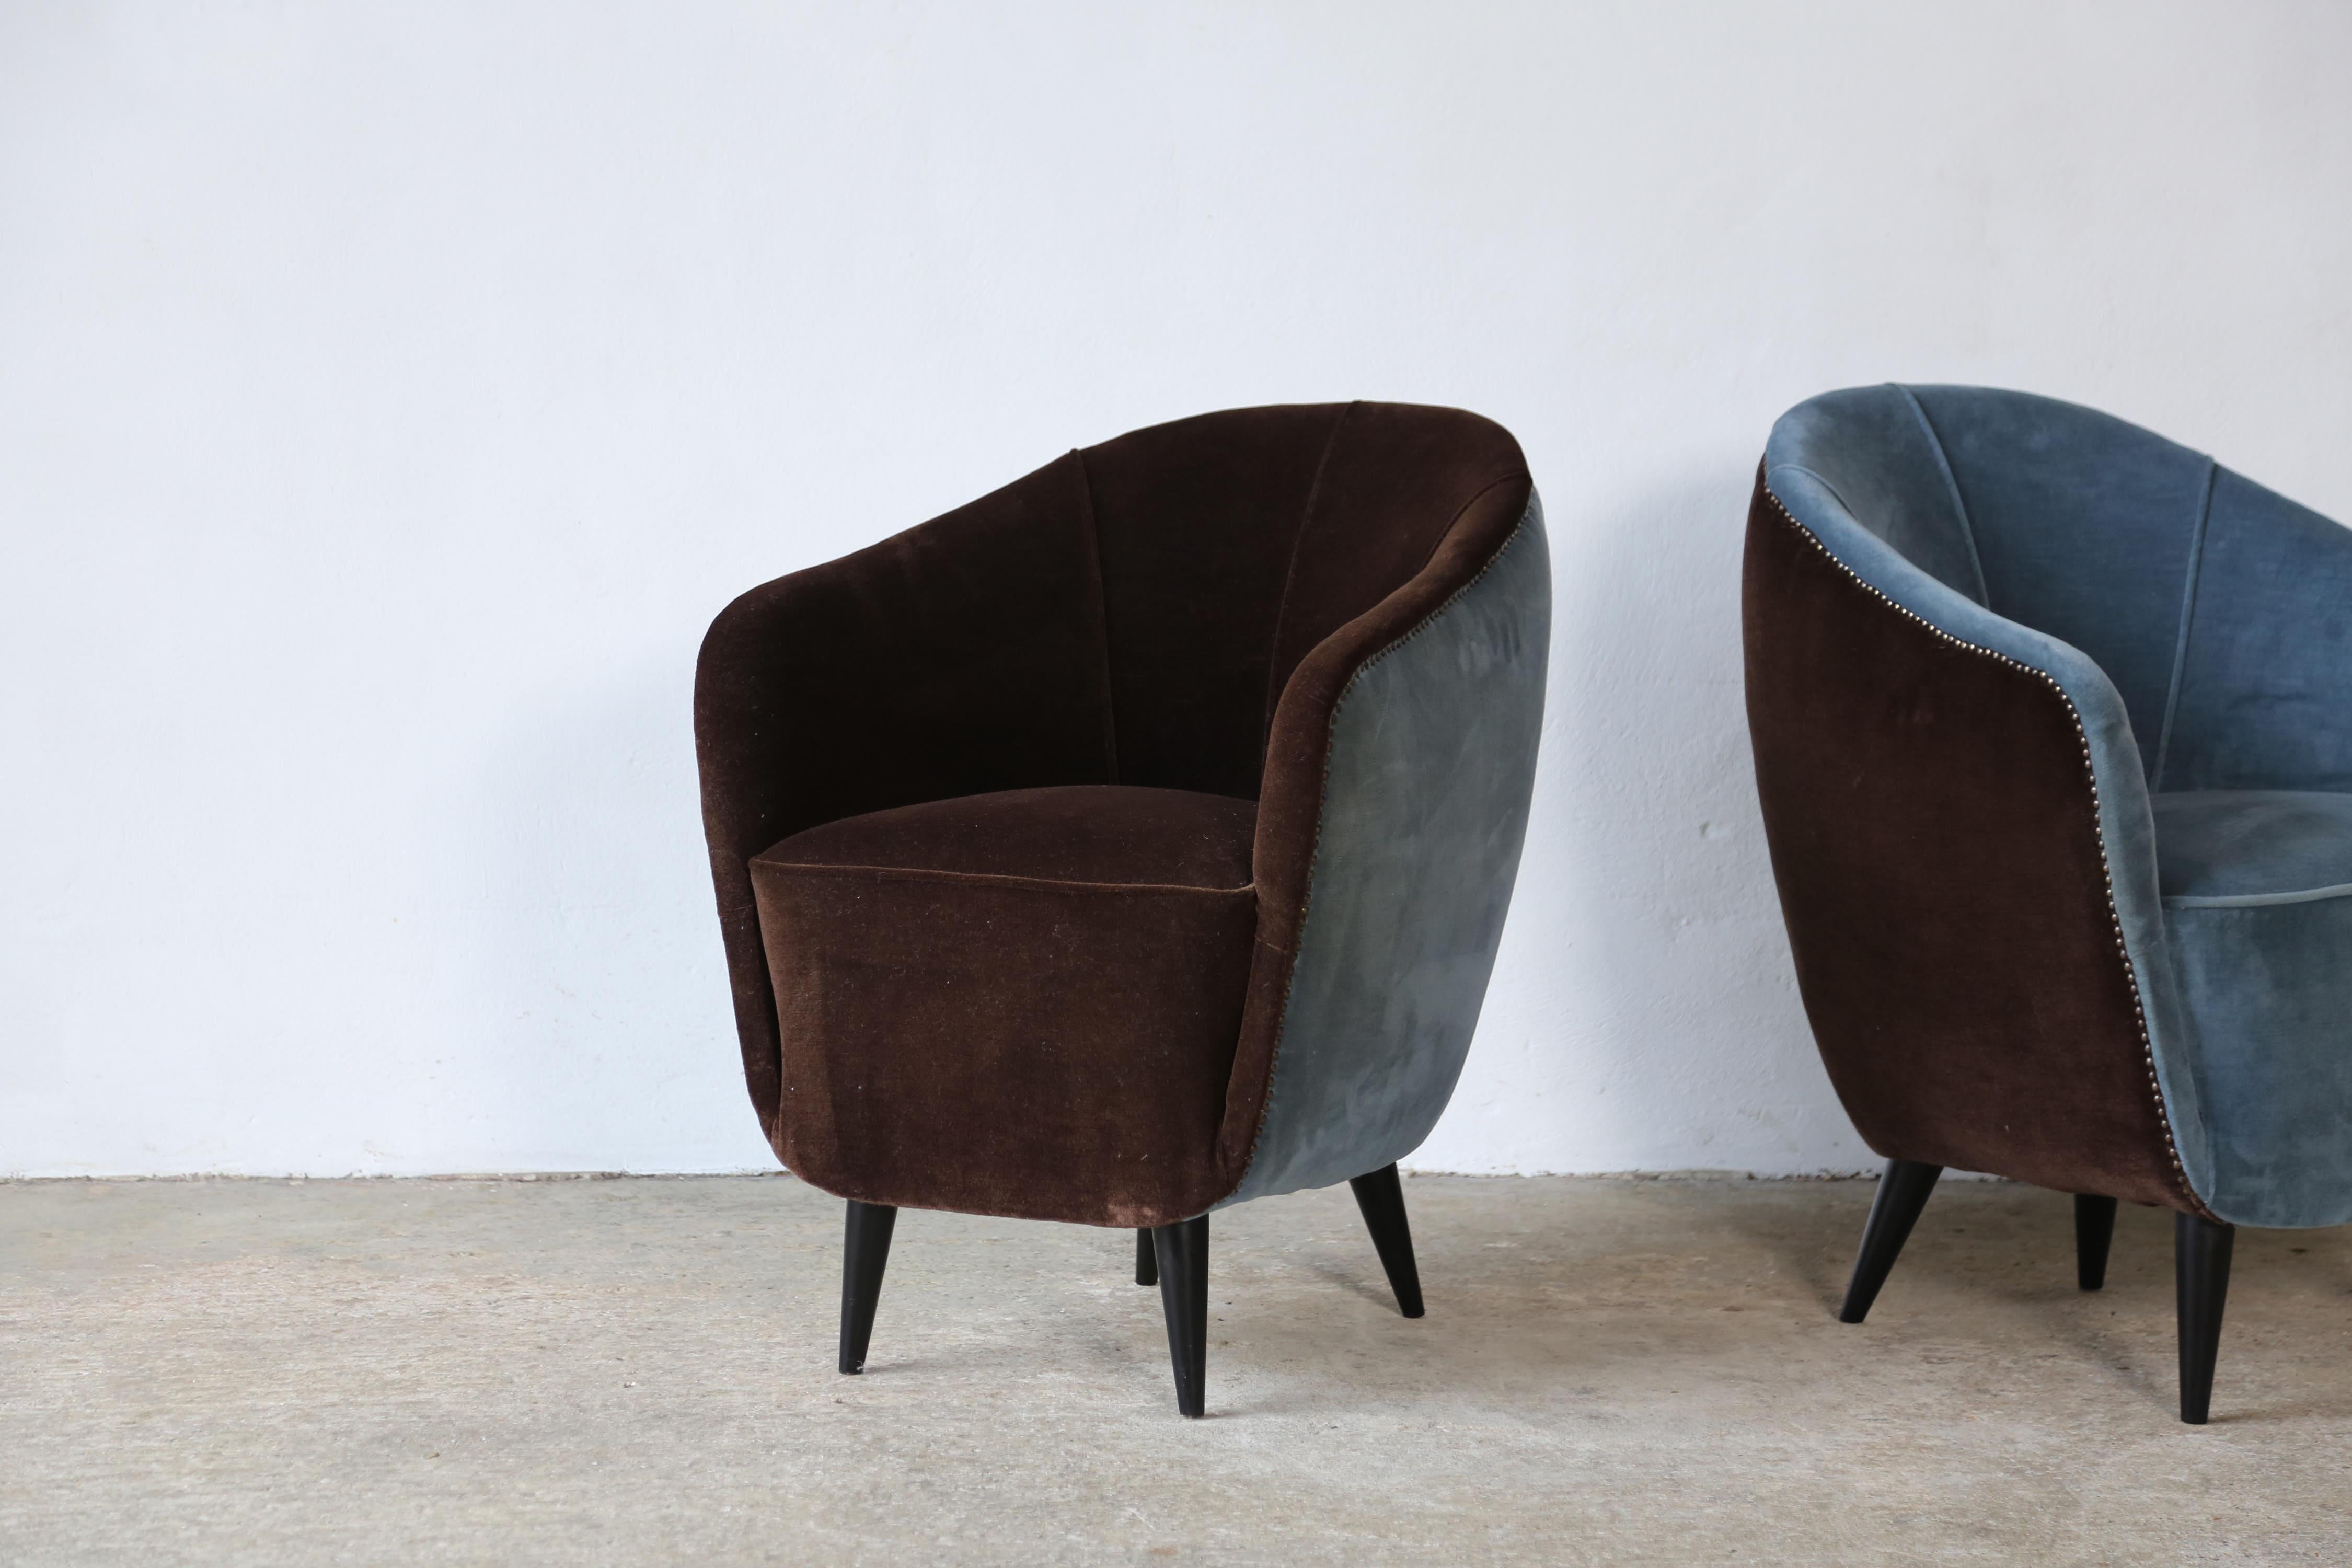 20th Century Pair of Gio Ponti Style Chairs, Italy, 1960s For Sale